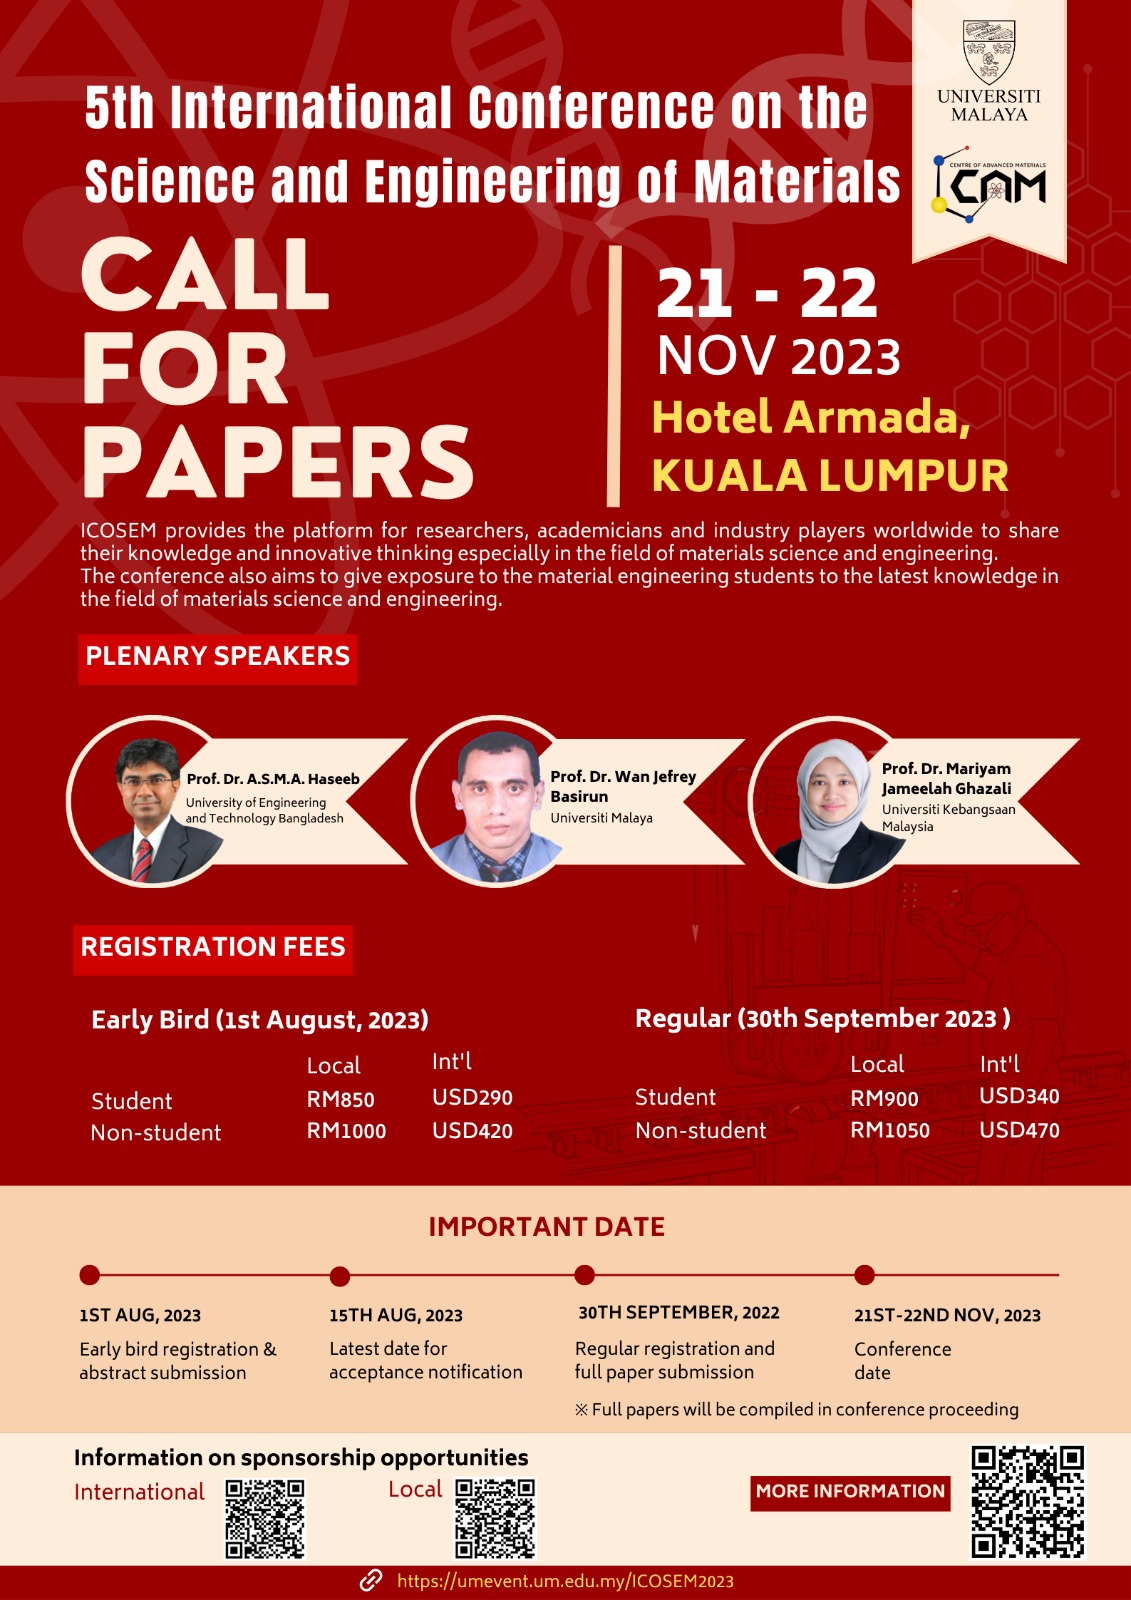 Call for Papers: [UNIVERSITI MALAYA] The 5th International Conference on the Science and Engineering of Materials 2023 (ICoSEM2023)